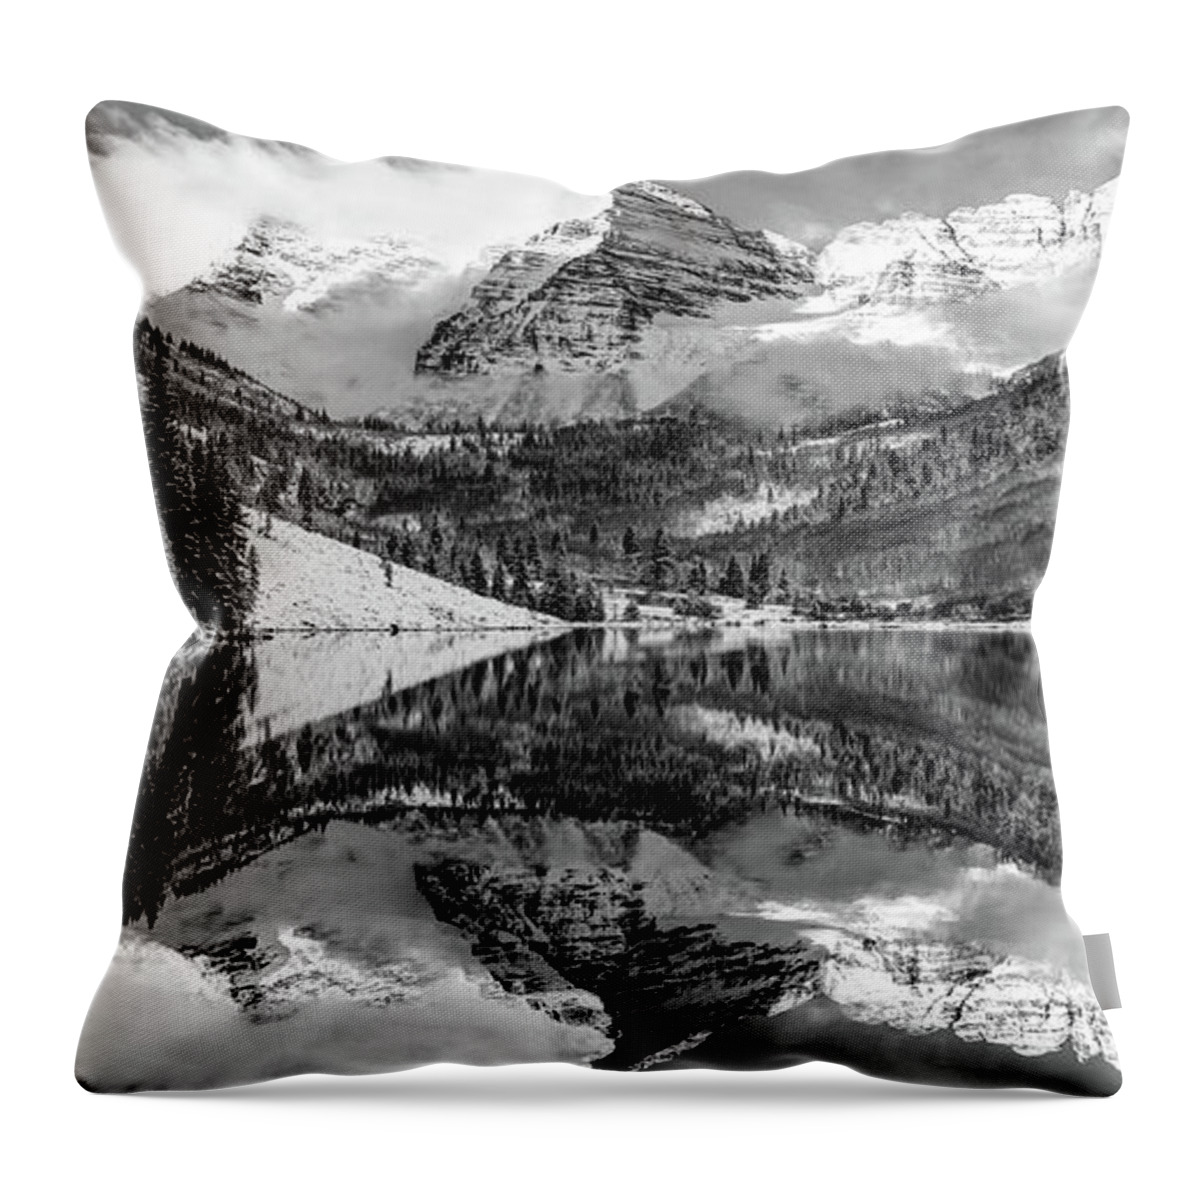 Maroon Bells Panorama Throw Pillow featuring the photograph Maroon Bells Panoramic View - Monochrome Mountain Landscape by Gregory Ballos